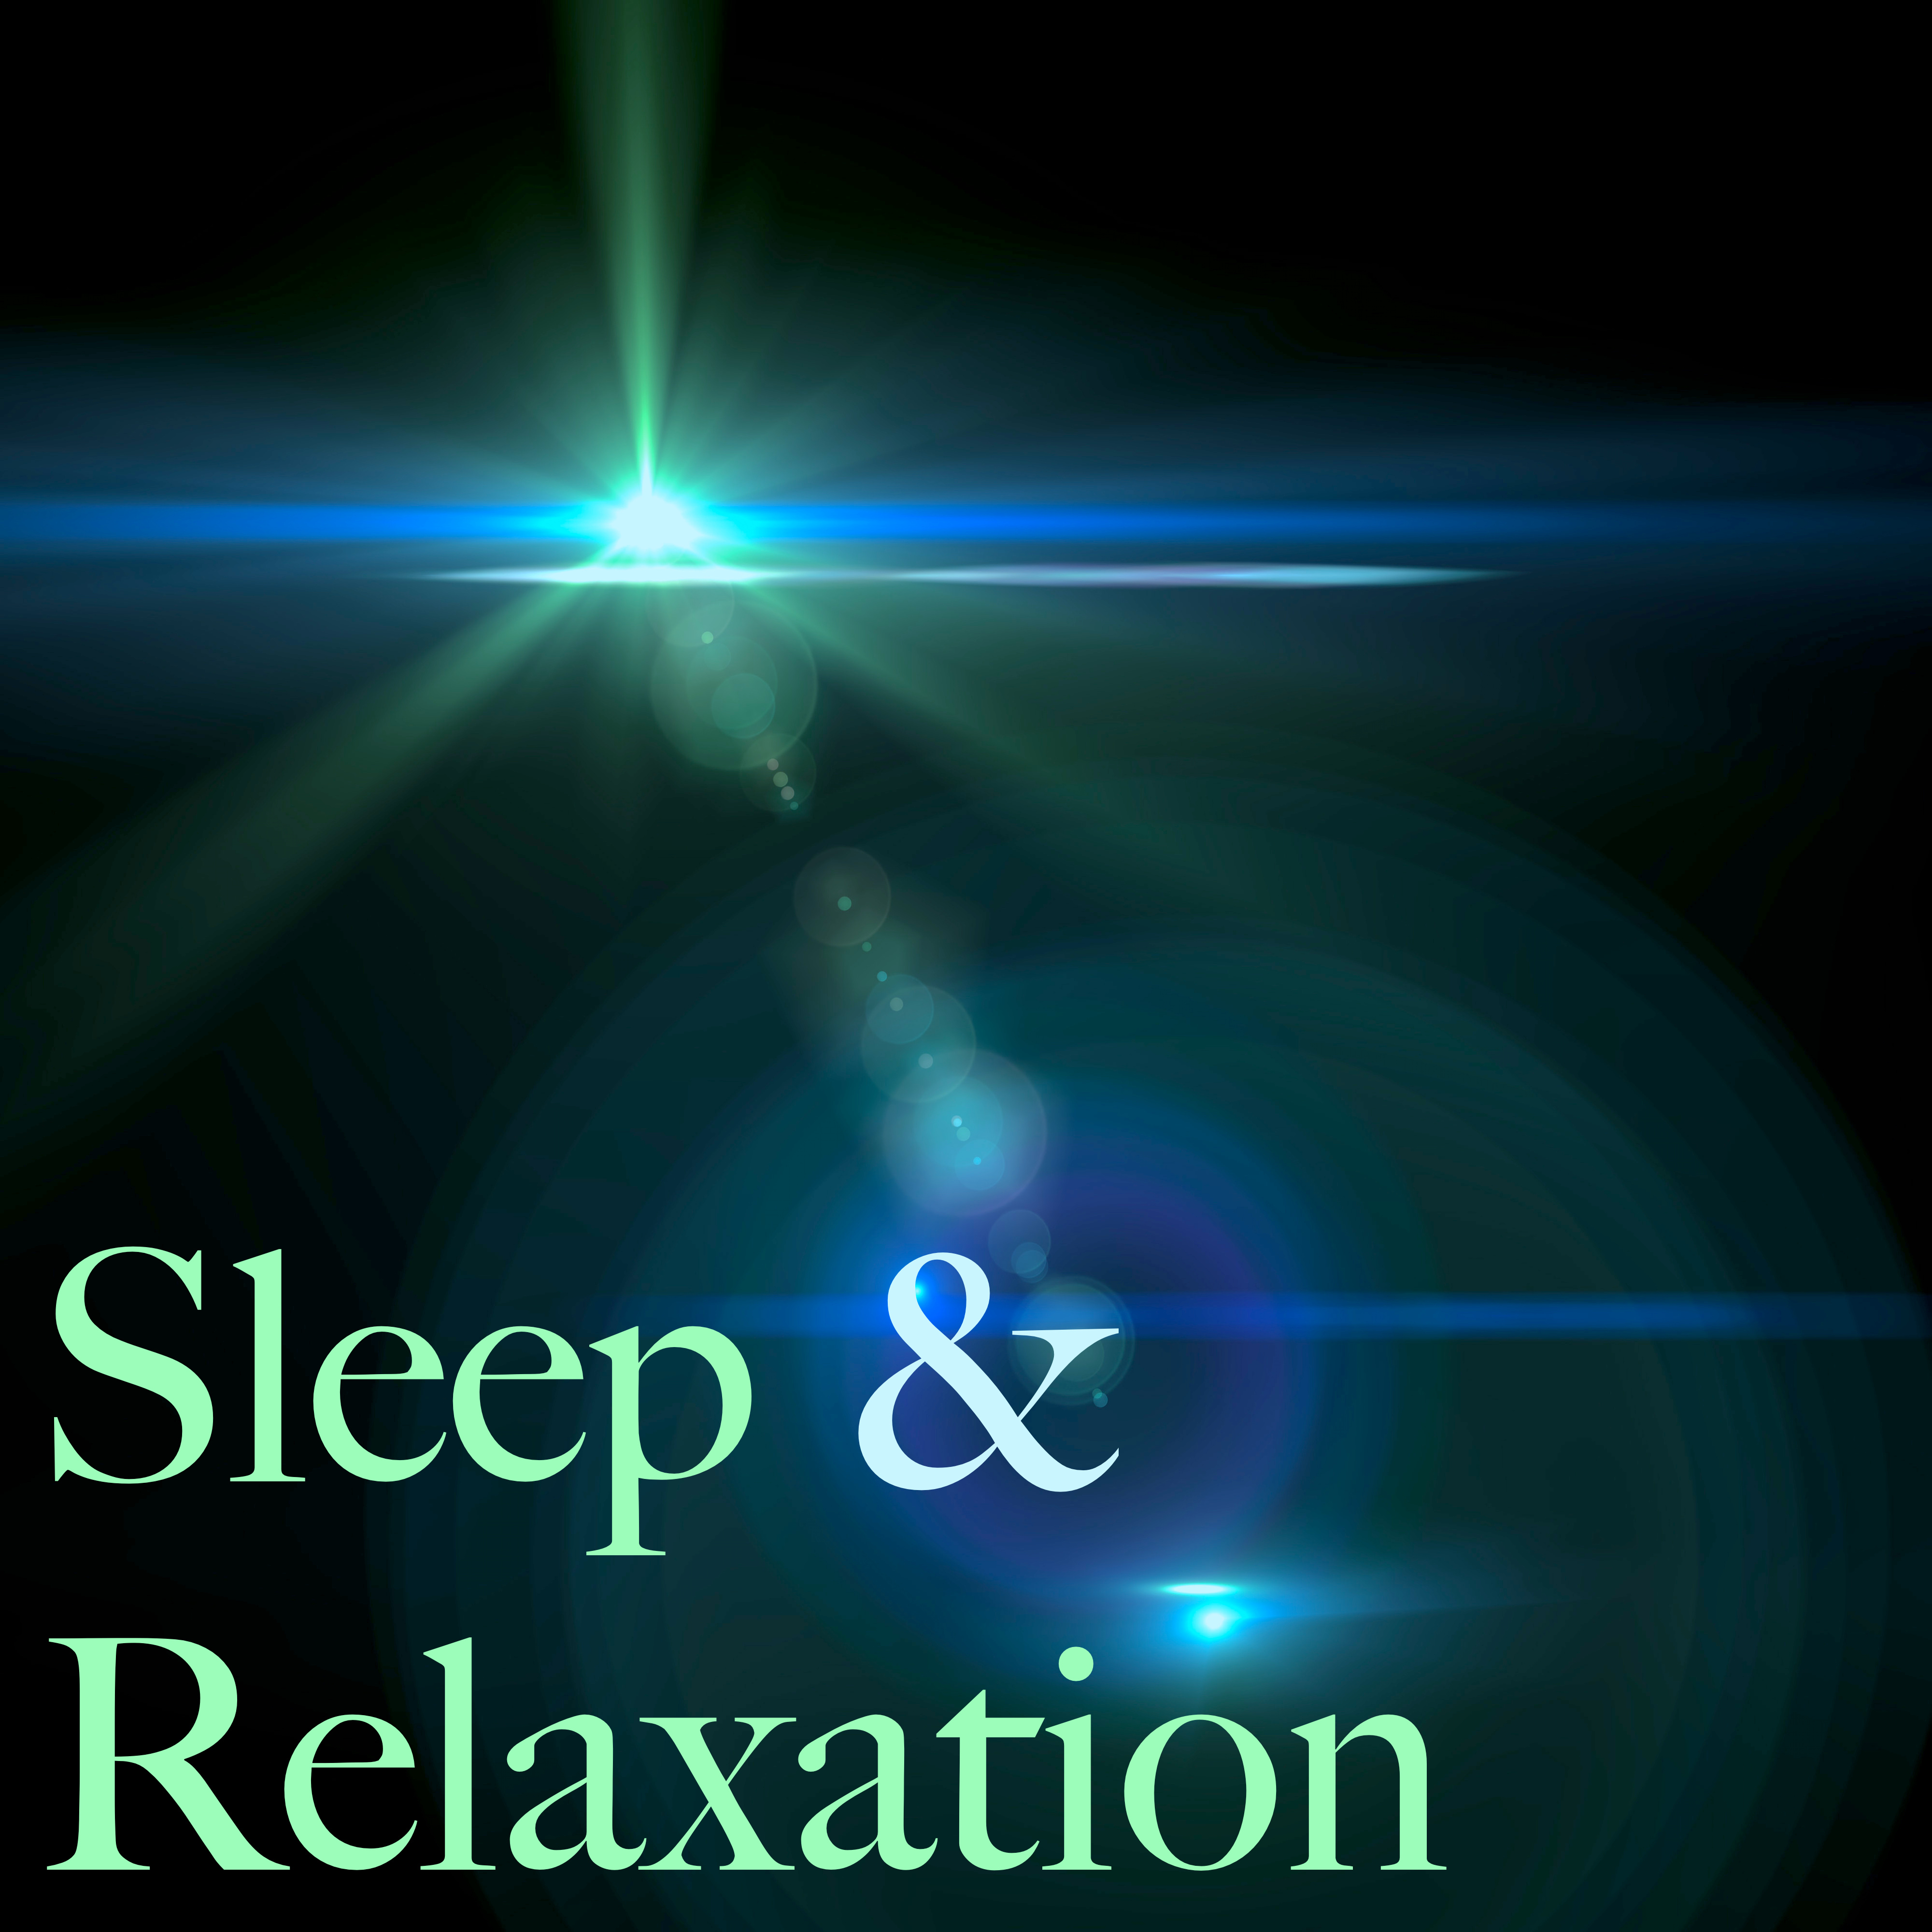 Sleep  Relaxation Music  Rest, Stress Reduction, Natural Sleep Aid, Music Therapy, Sleep Meditation  Sweet Dreams